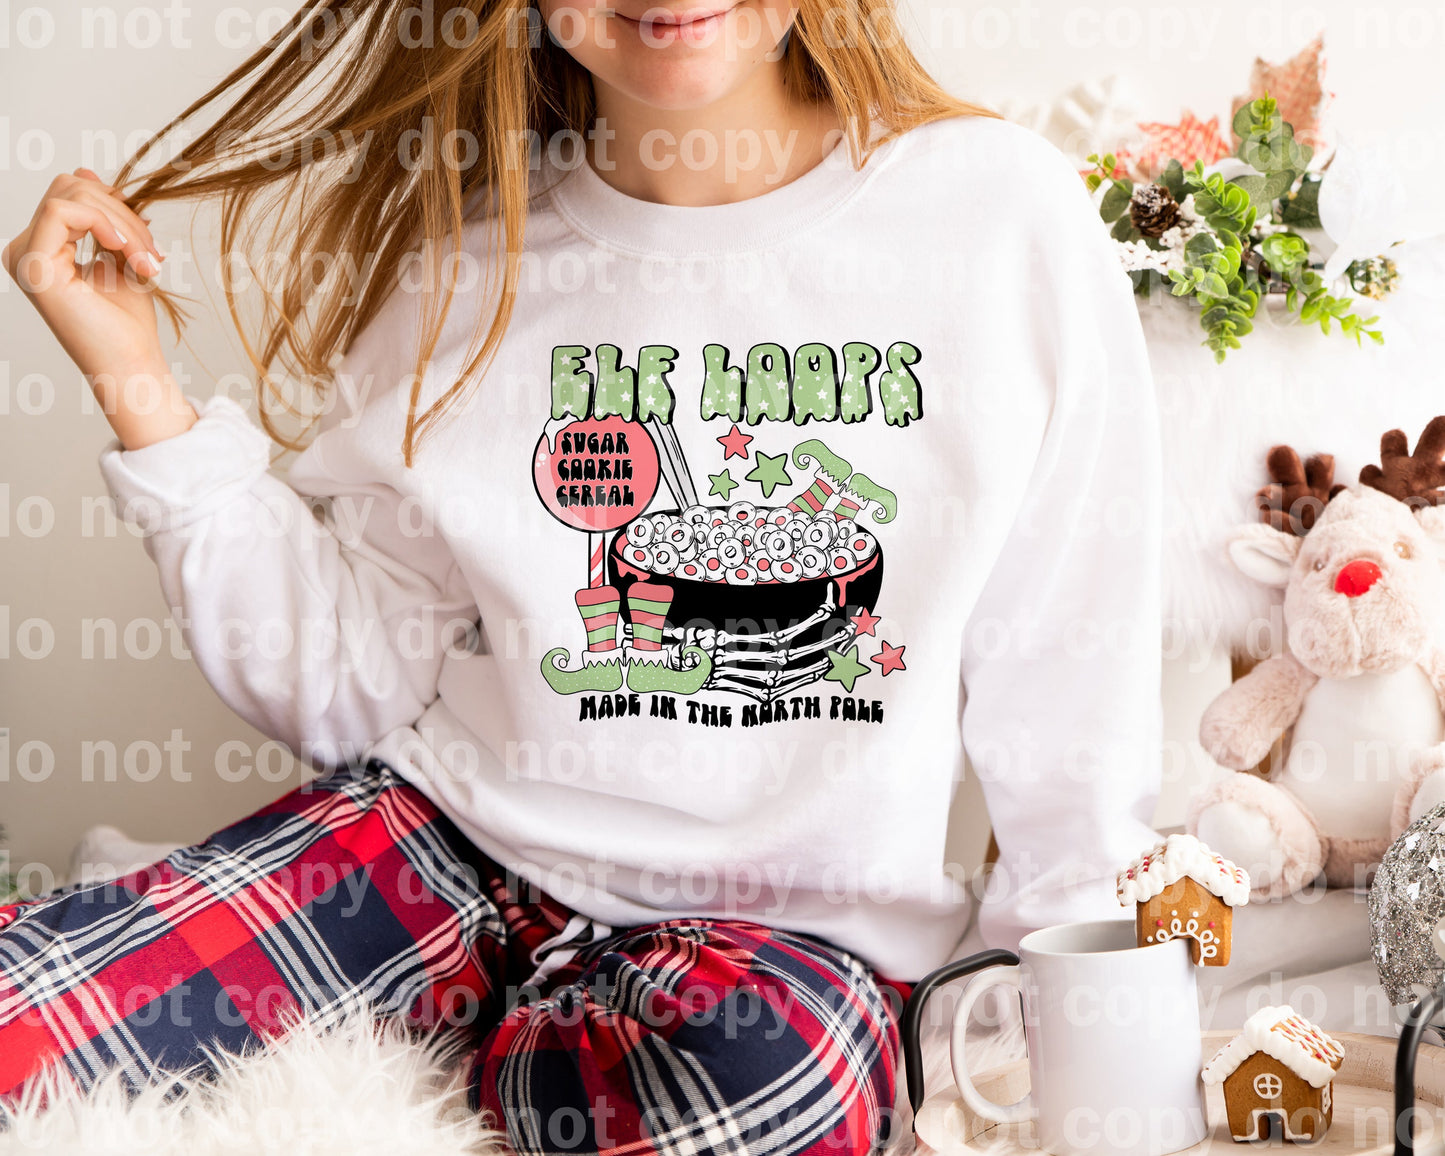 Elf Loops Made In The North Pole Dream Print or Sublimation Print